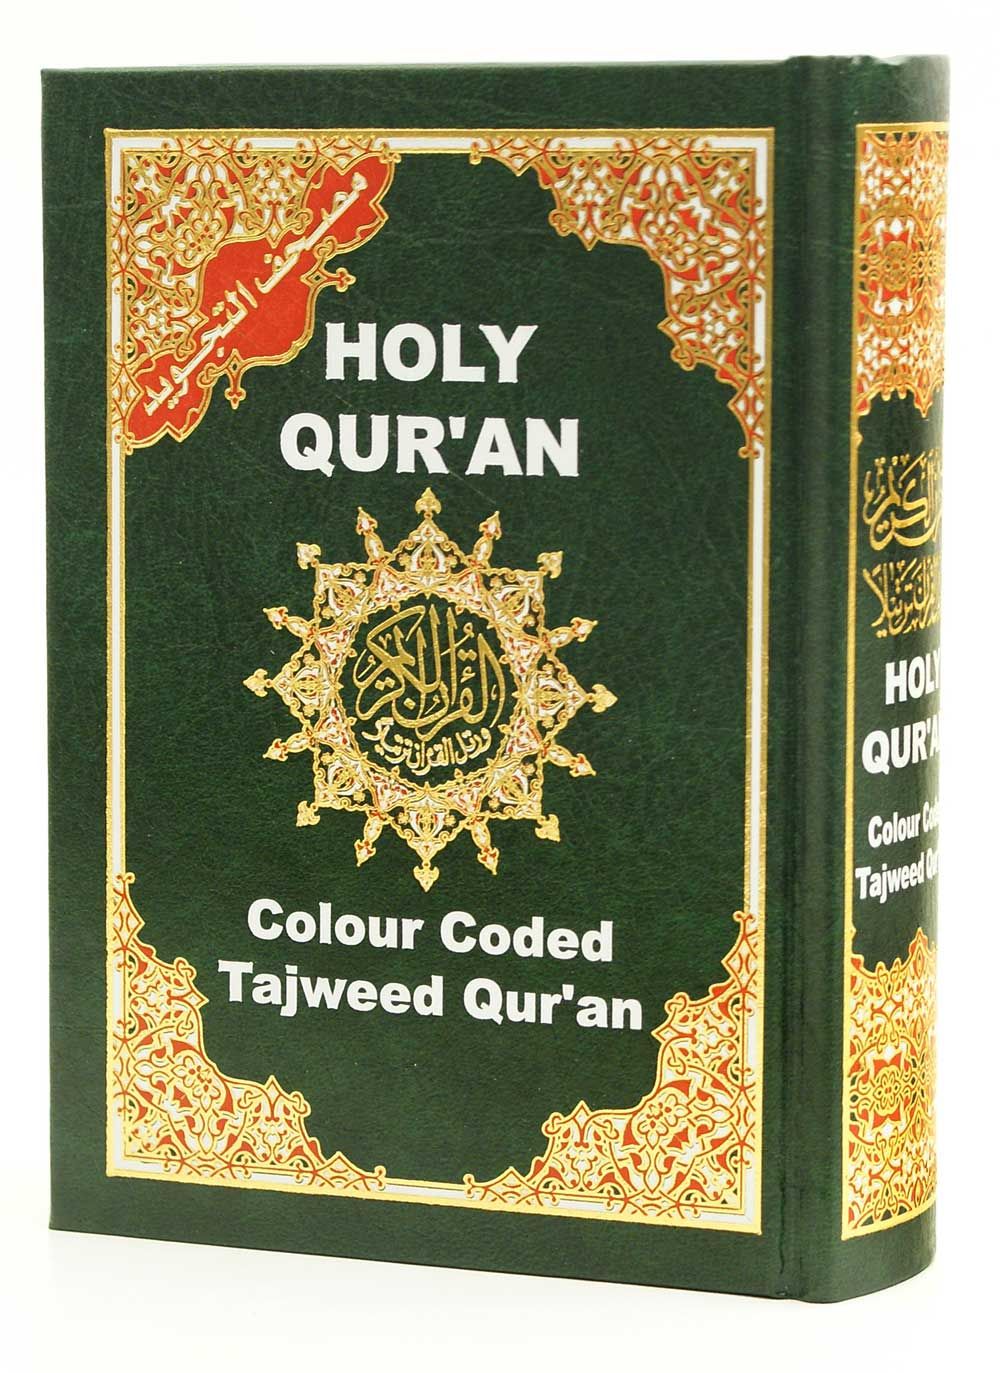 Color Coded Tajweed Quran Indian Calligraphy Size 5 x 7 (Arabic Edition)